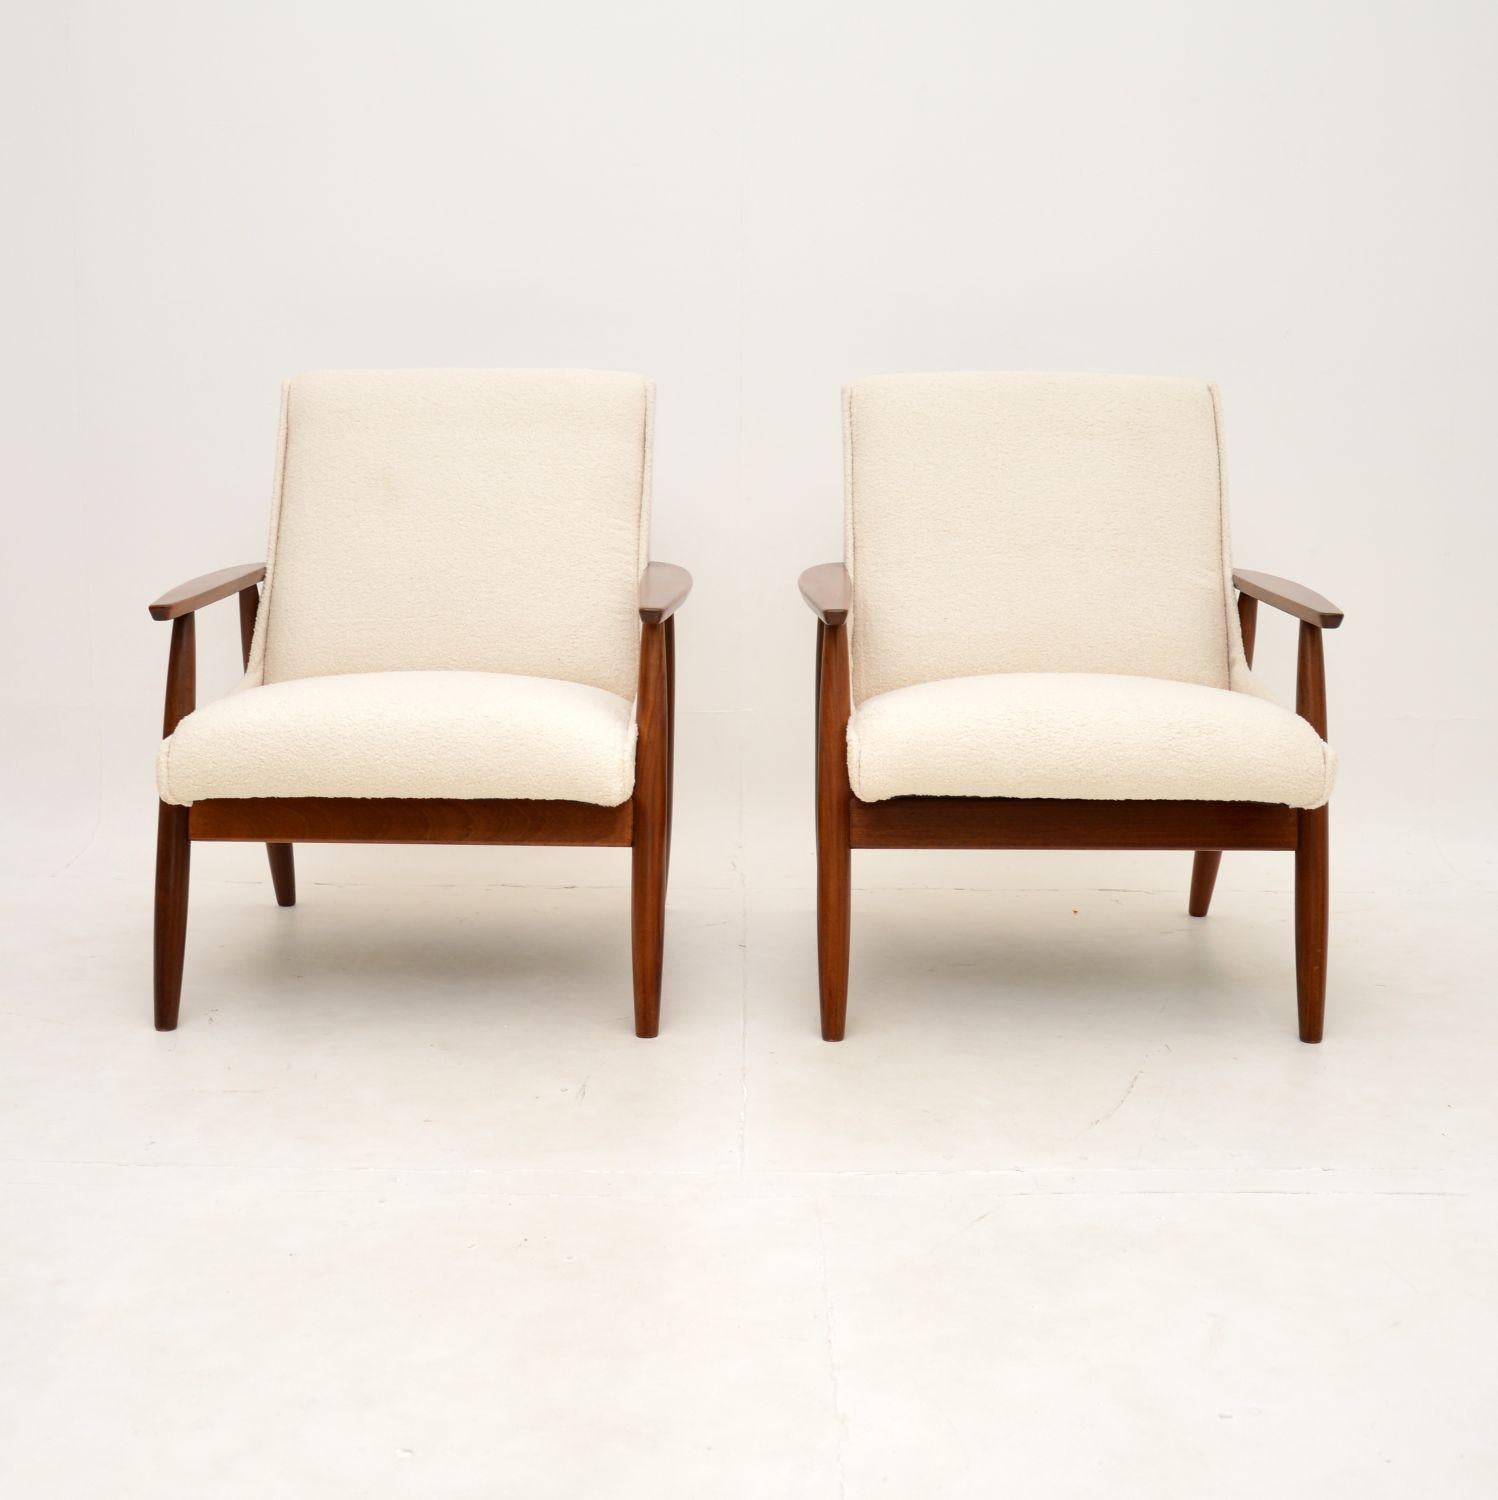 A stunning pair of Danish vintage armchairs. They are in the manner of Arne Vodder, we are not completely sure who designed them, but they were made in Denmark and date from the 1960’s.

They are very comfortable as well as stylish, the quality is